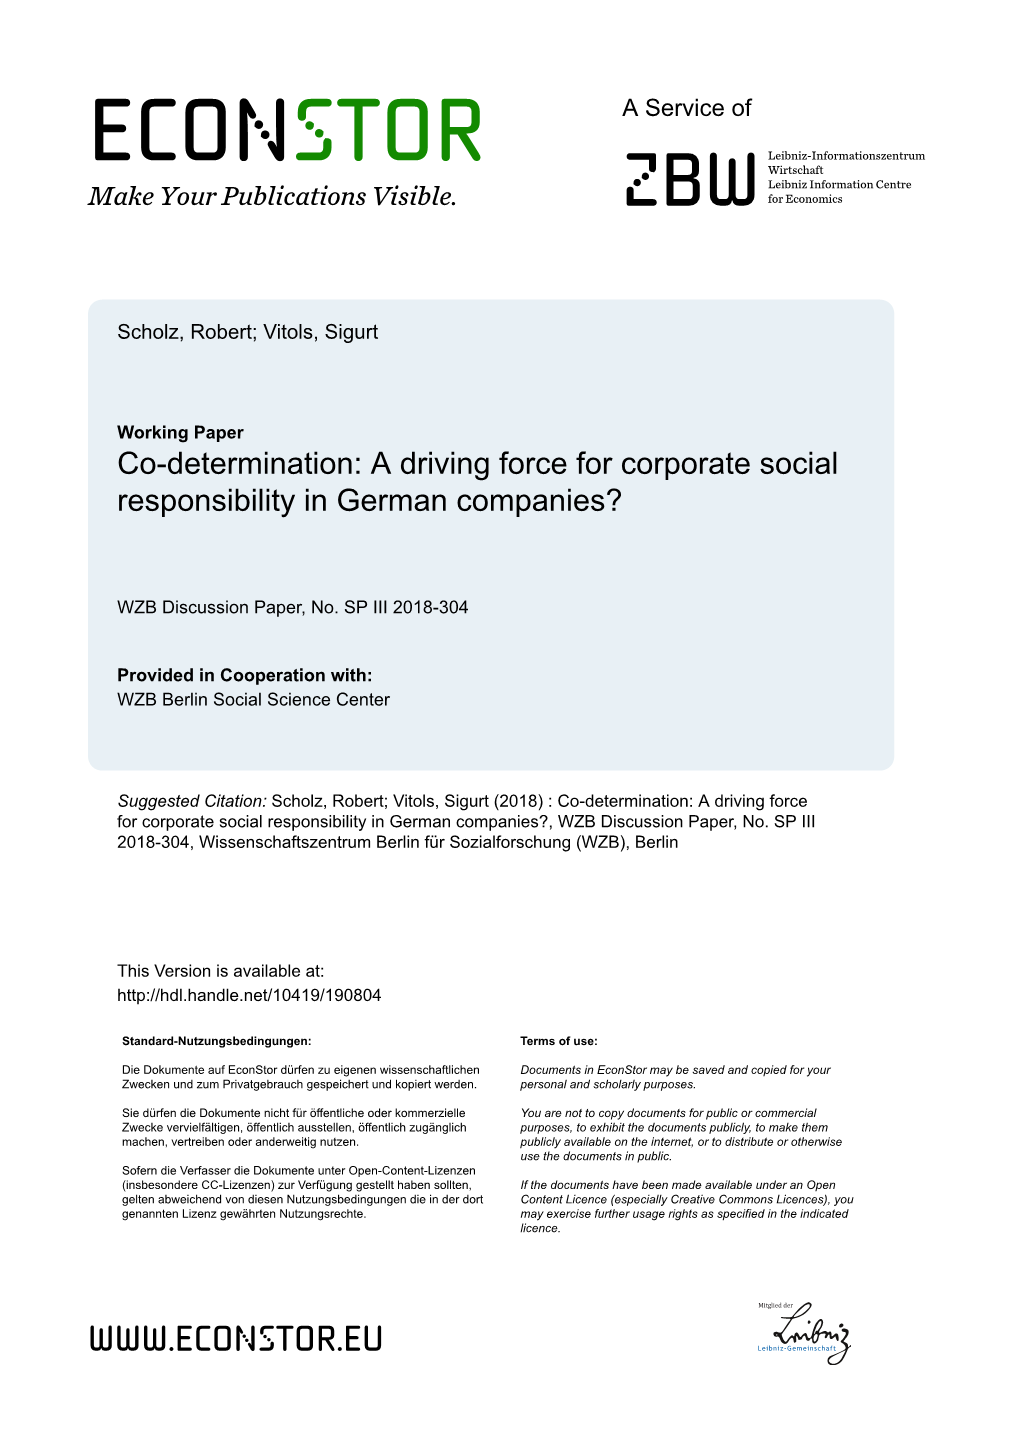 Co-Determination: a Driving Force for Corporate Social Responsibility in German Companies?